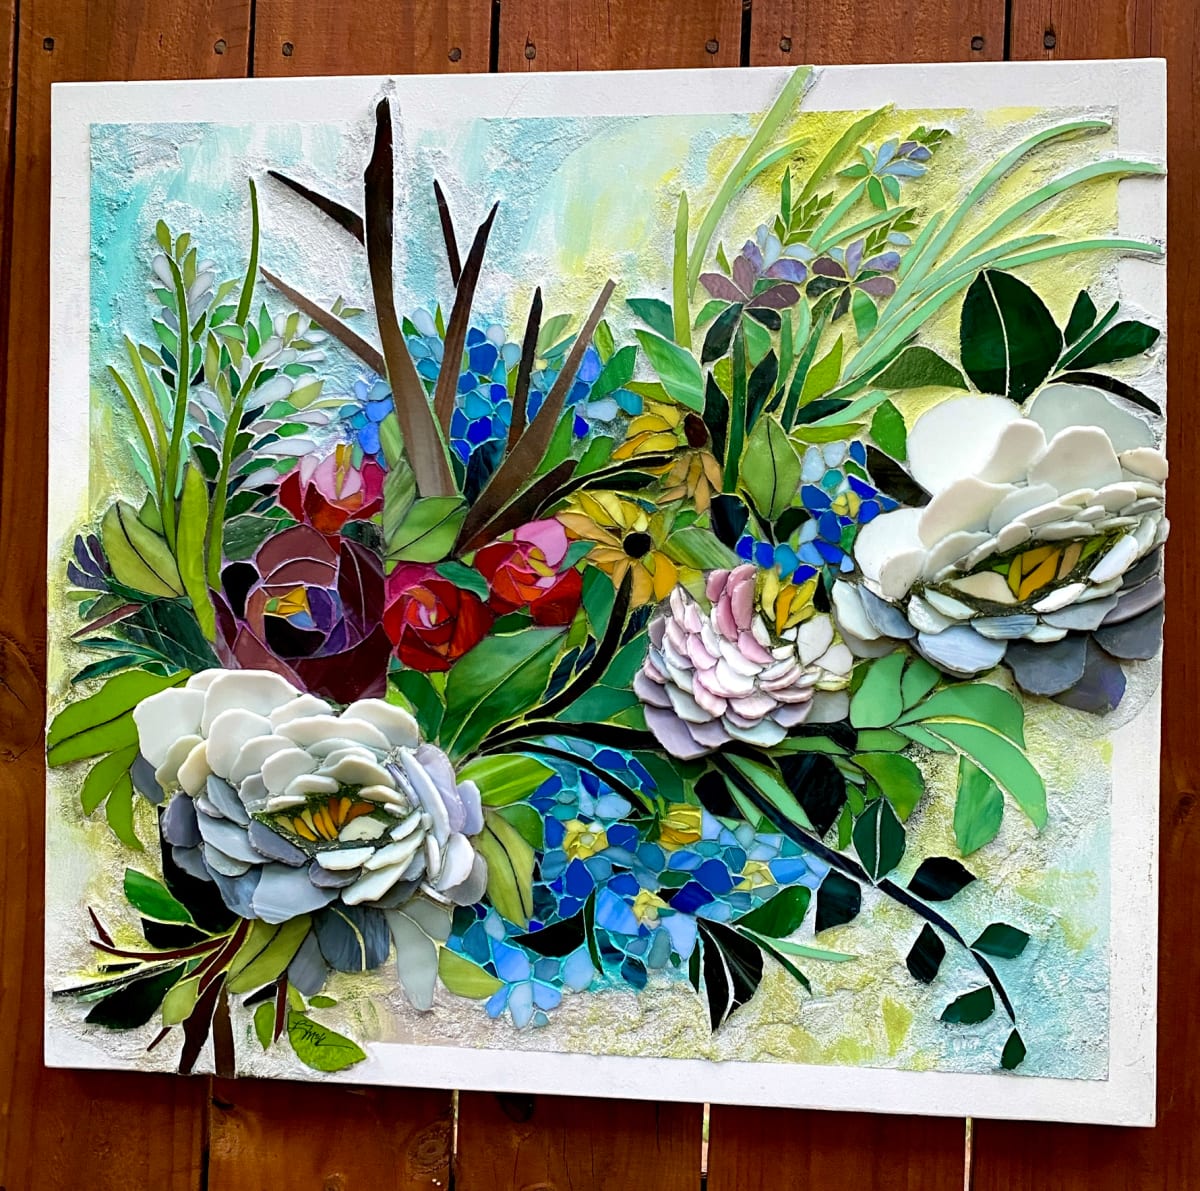 Treasure Sweep  Image: Treasure Sweep
A cottage garden of floral treasures with raised stained glass petals 